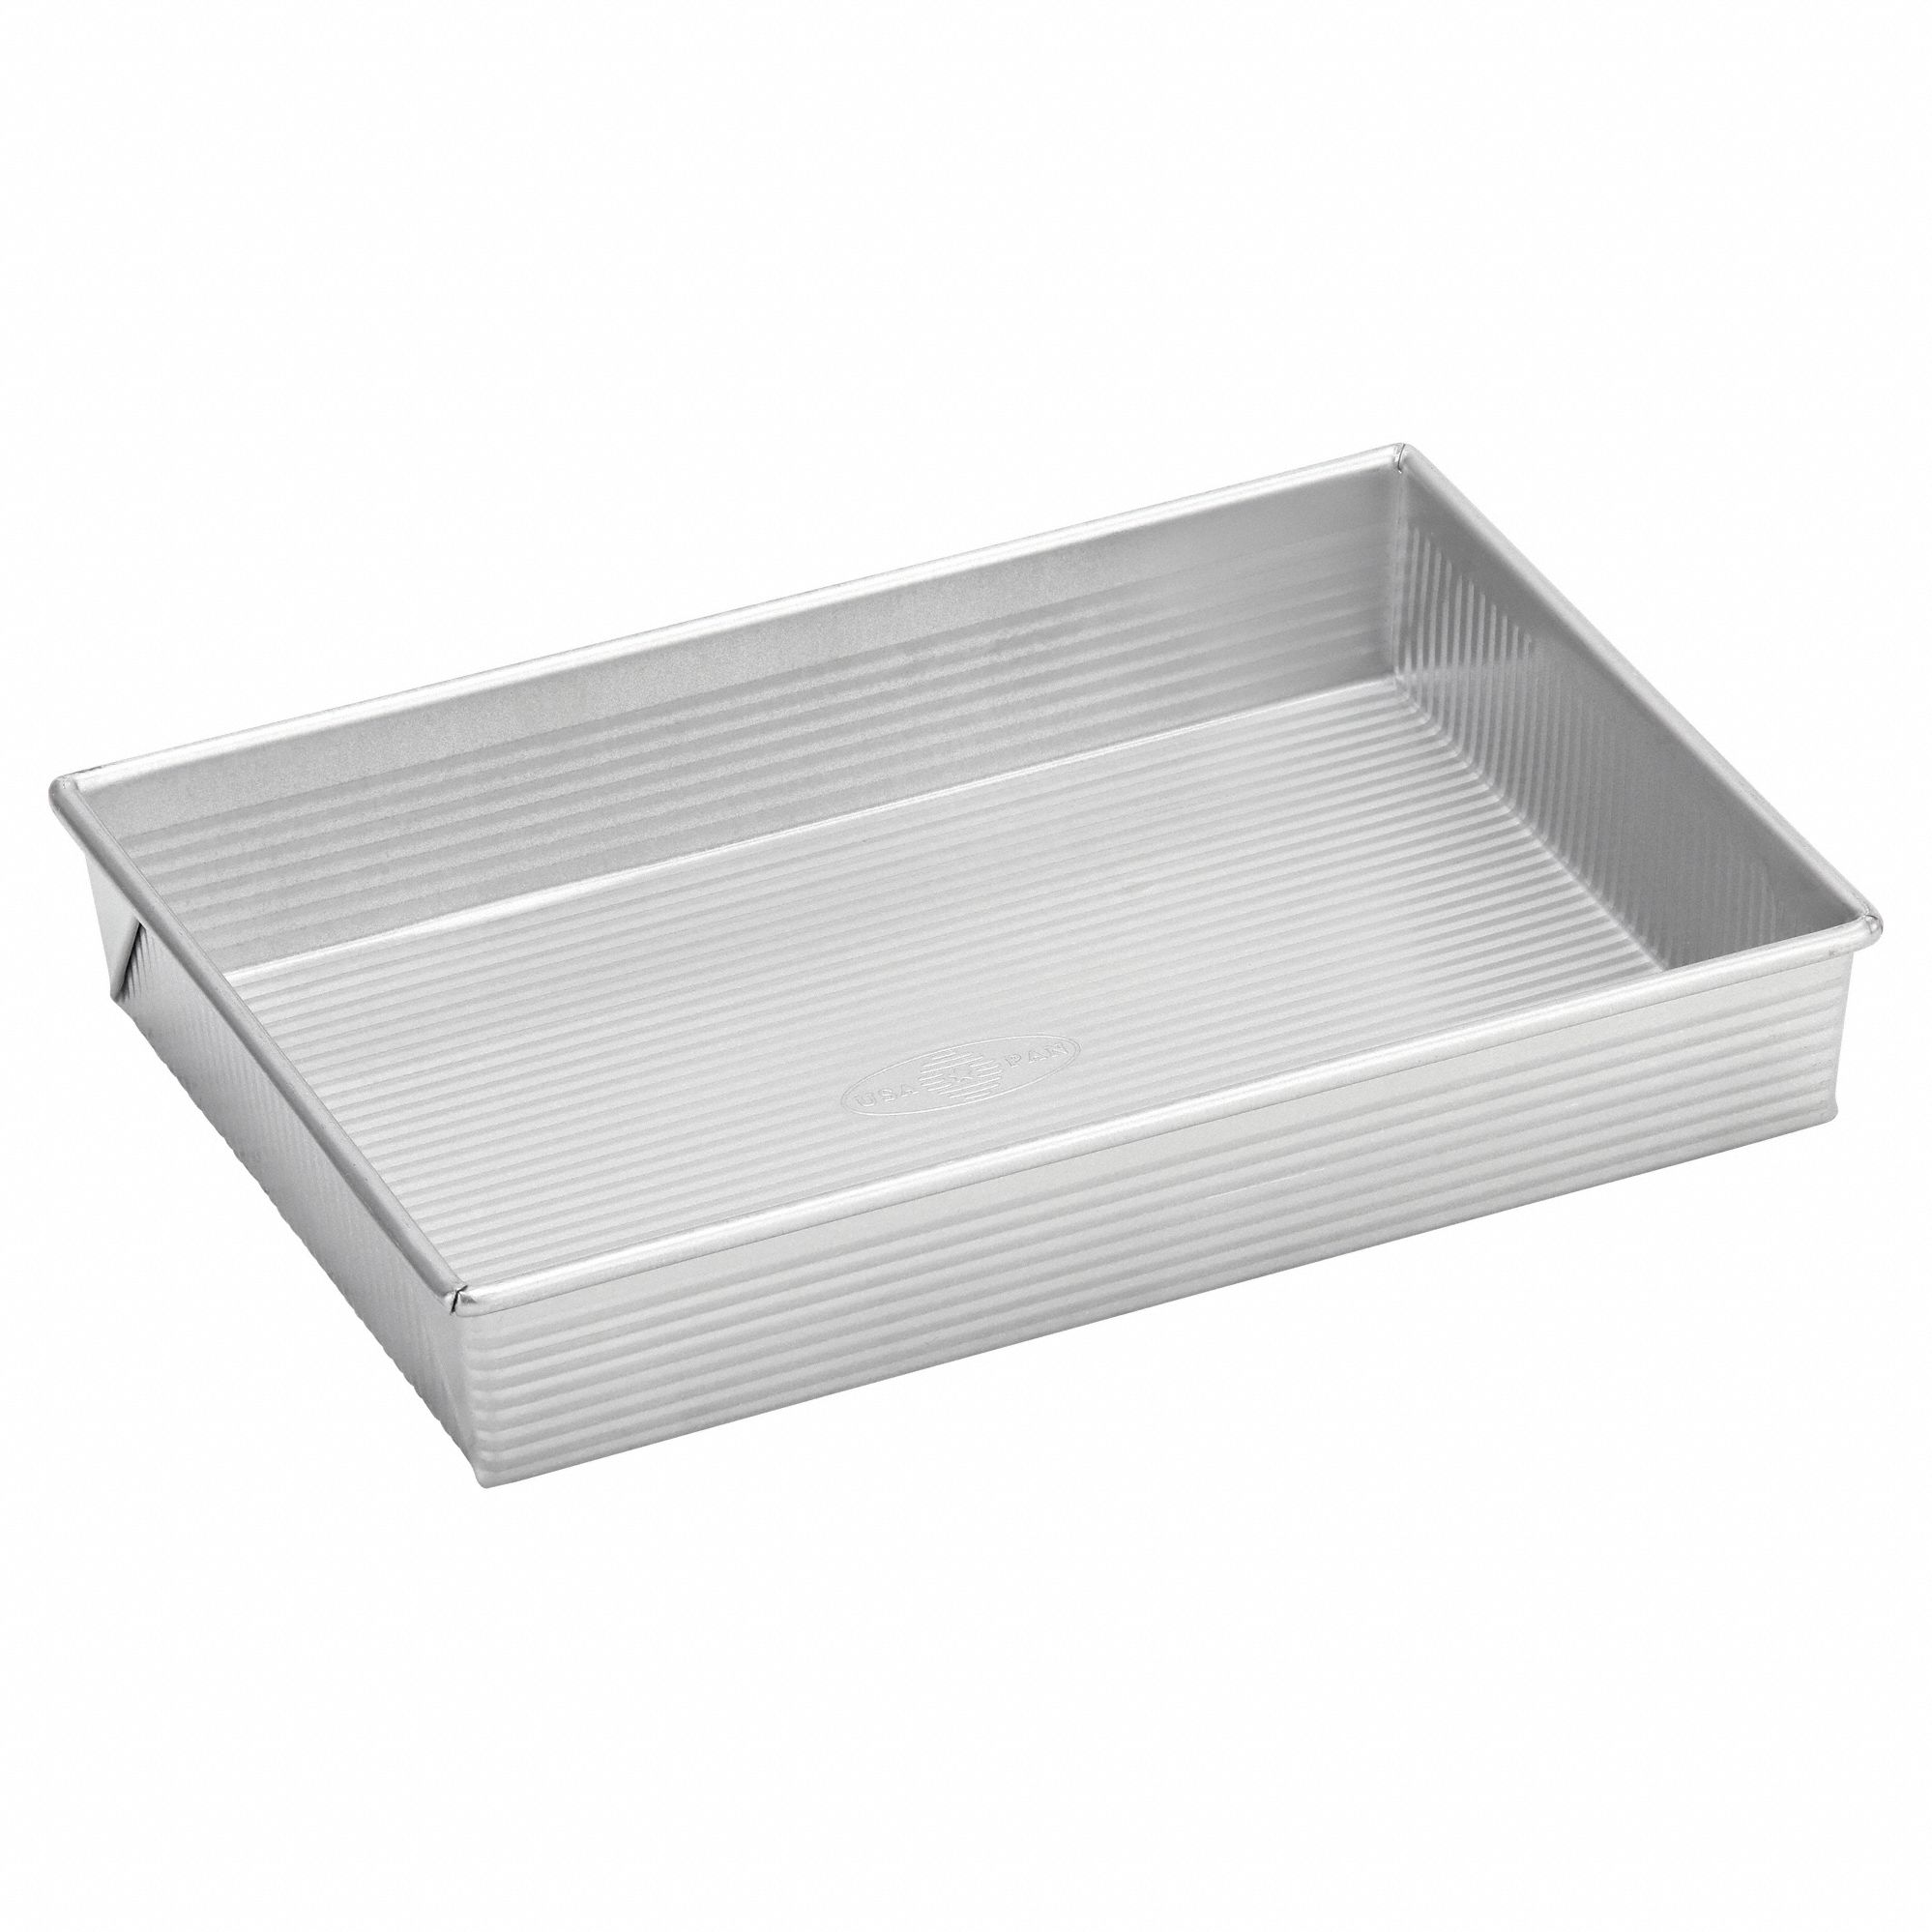 Thunder Group ALCP1403, 14x3-Inch Aluminum Layer Cake Pan